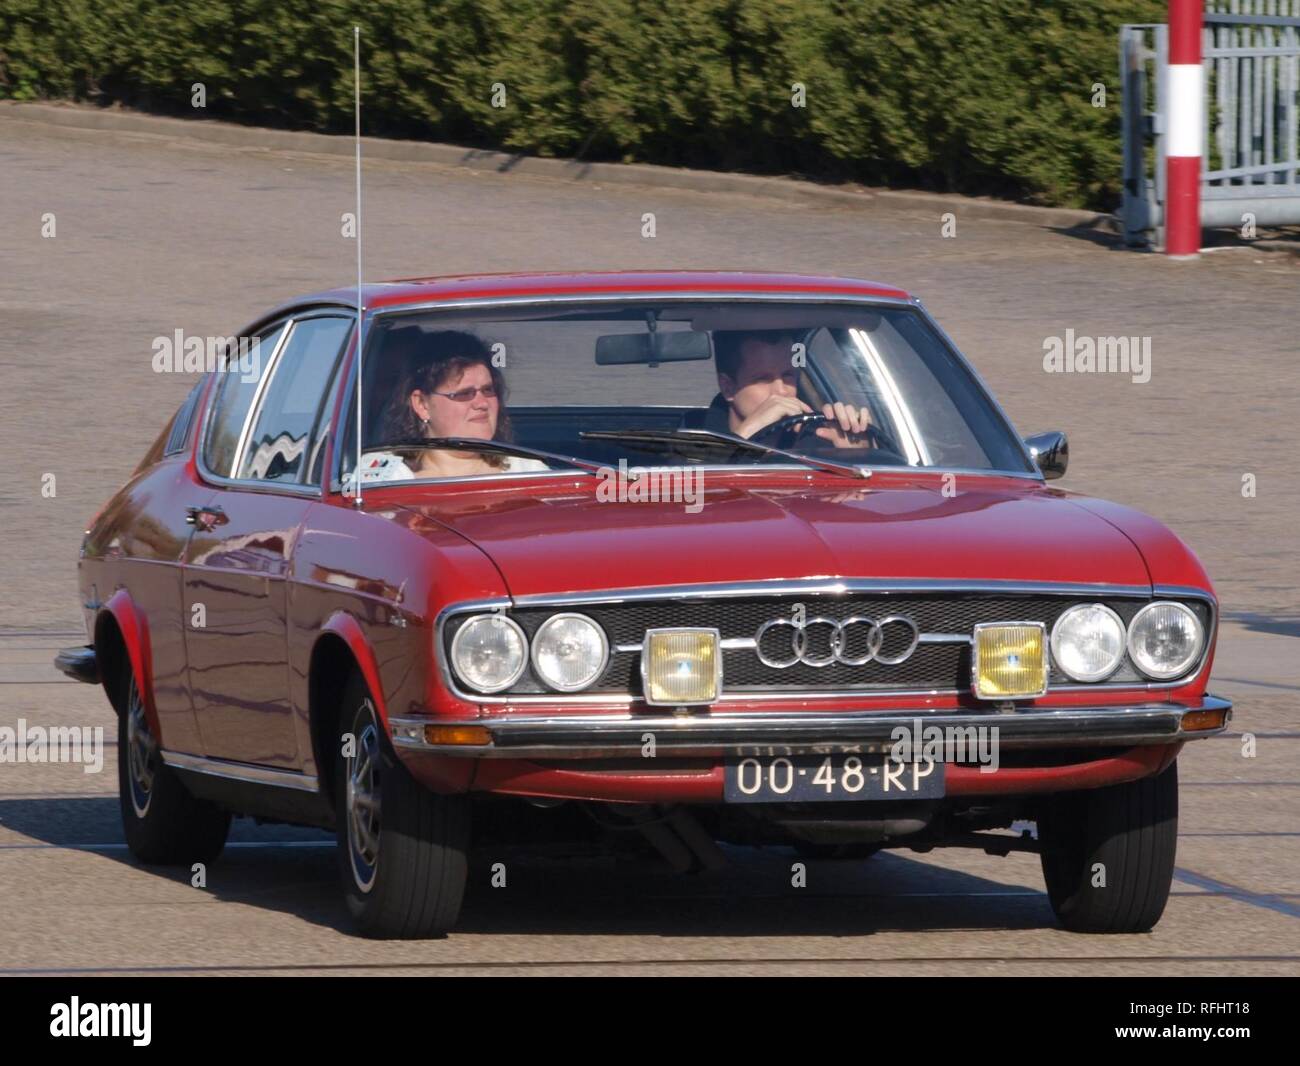 Audi 100 Coupe S, build in 1977, Dutch licence registration 00-48-RP, at IJmuiden, The Netherlands, pic3. Stock Photo